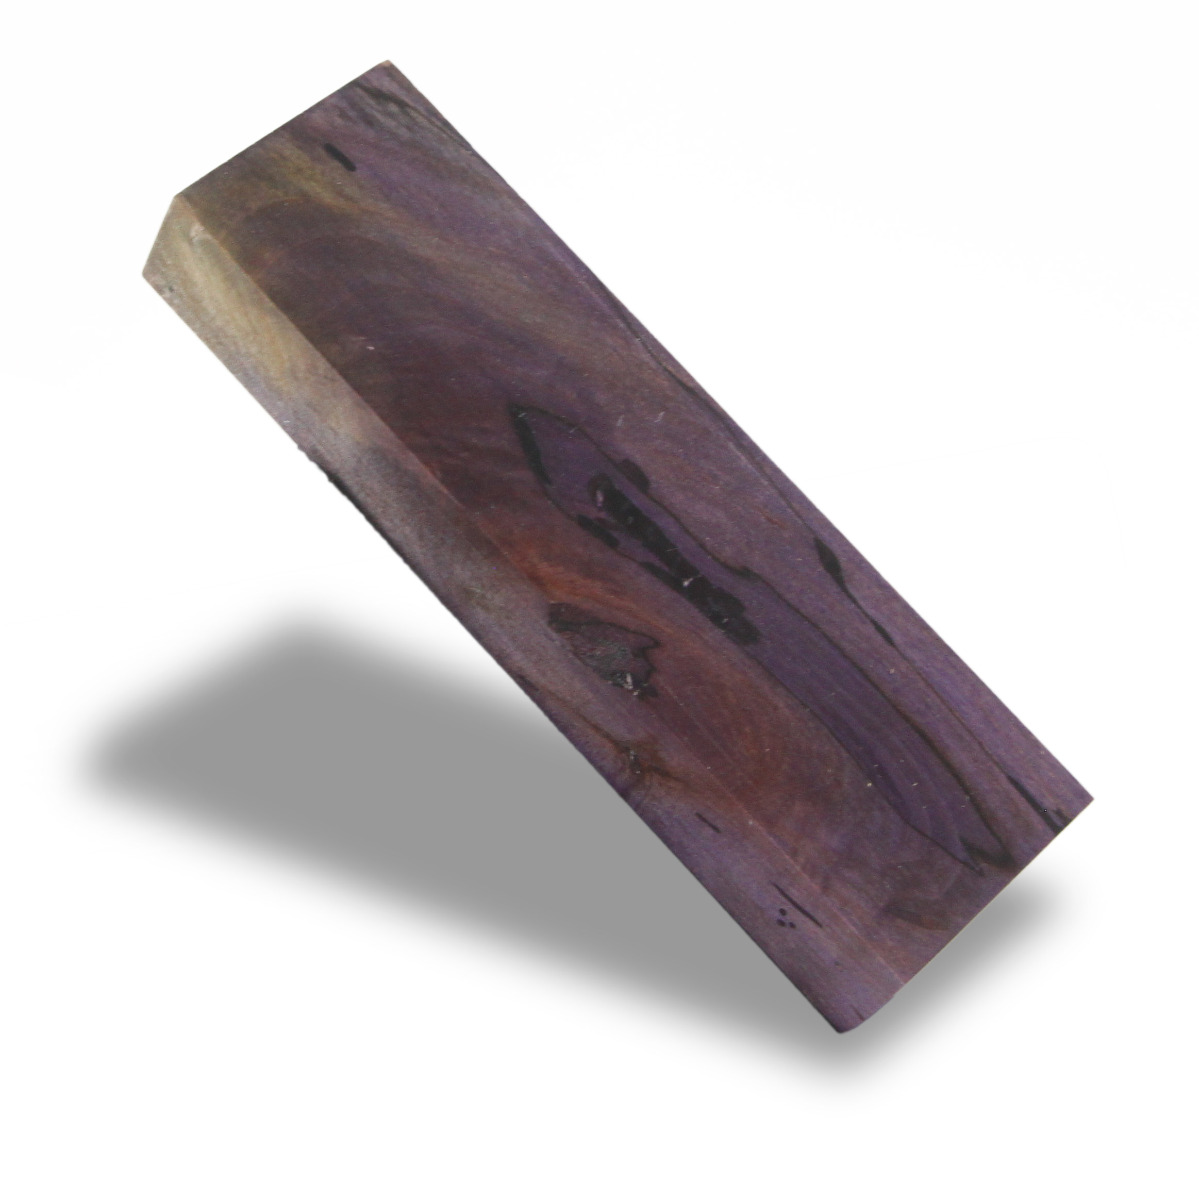 Spalted Maple Black Line Burl Knife Block - Dyed - #4040 - 1.6"x 0.85"x 5.55"